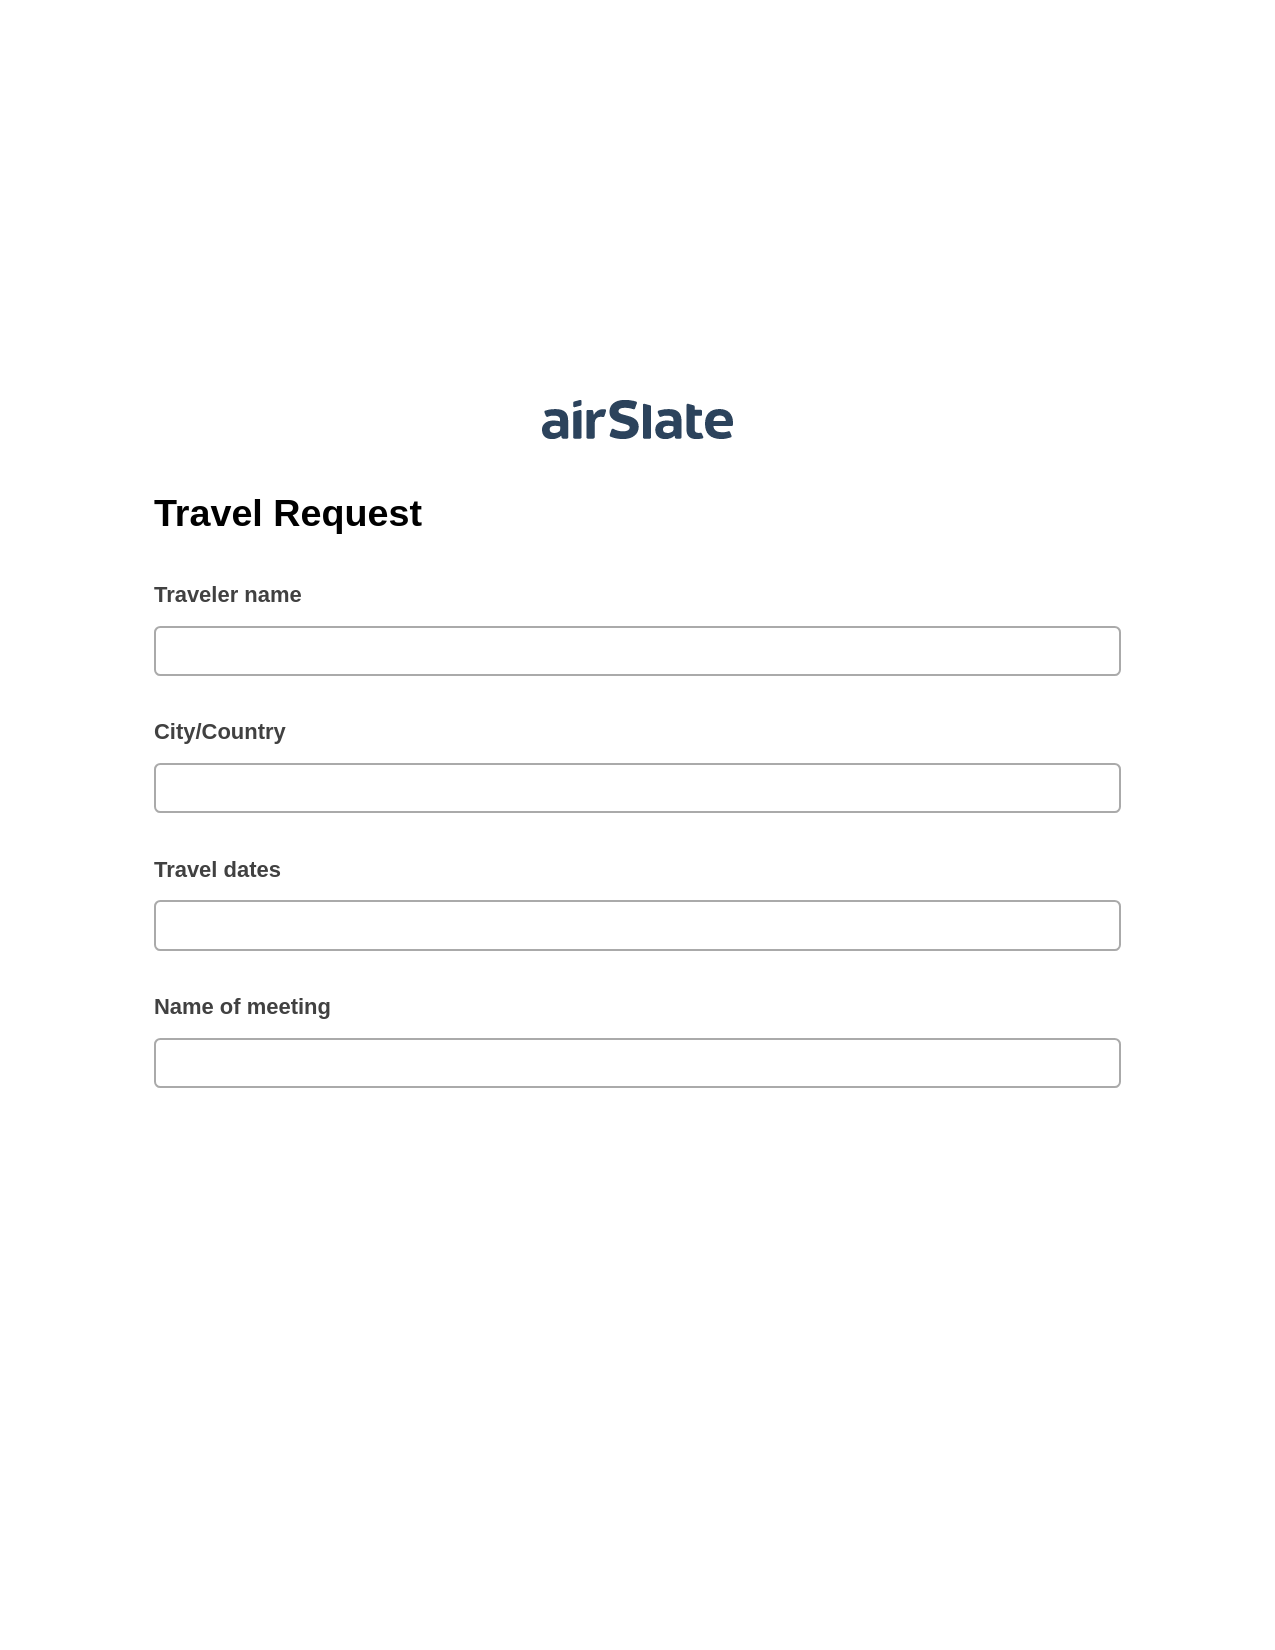 Multirole Travel Request Pre-fill Slate from MS Dynamics 365 Records Bot, Send a Slate to Salesforce Contact Bot, Box Bot